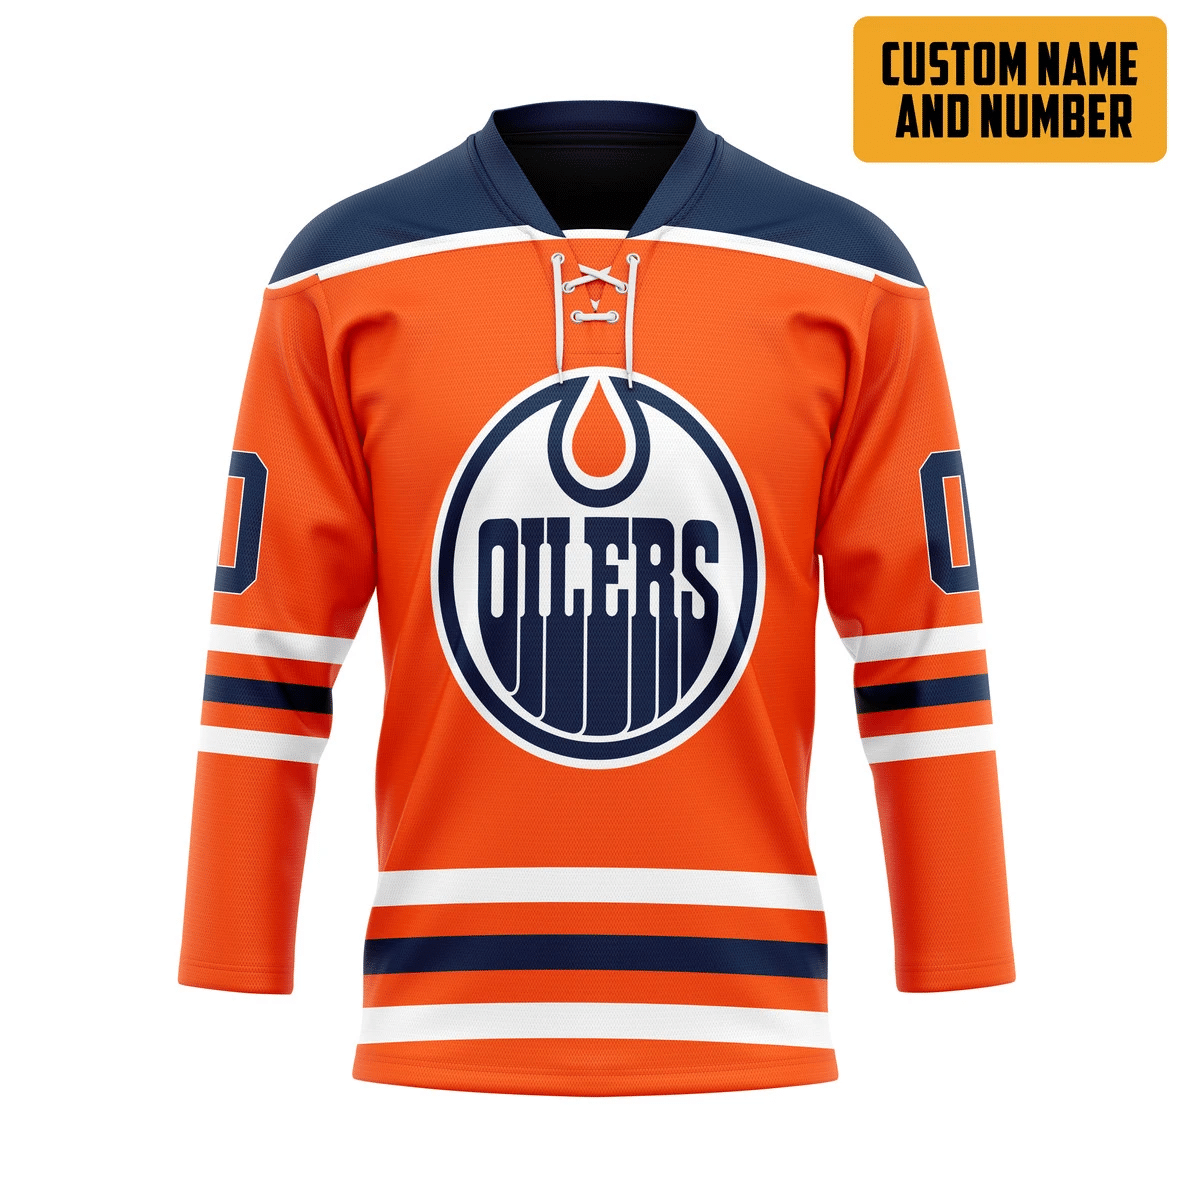 Choosing a hockey jersey is not as difficult as you think. 67